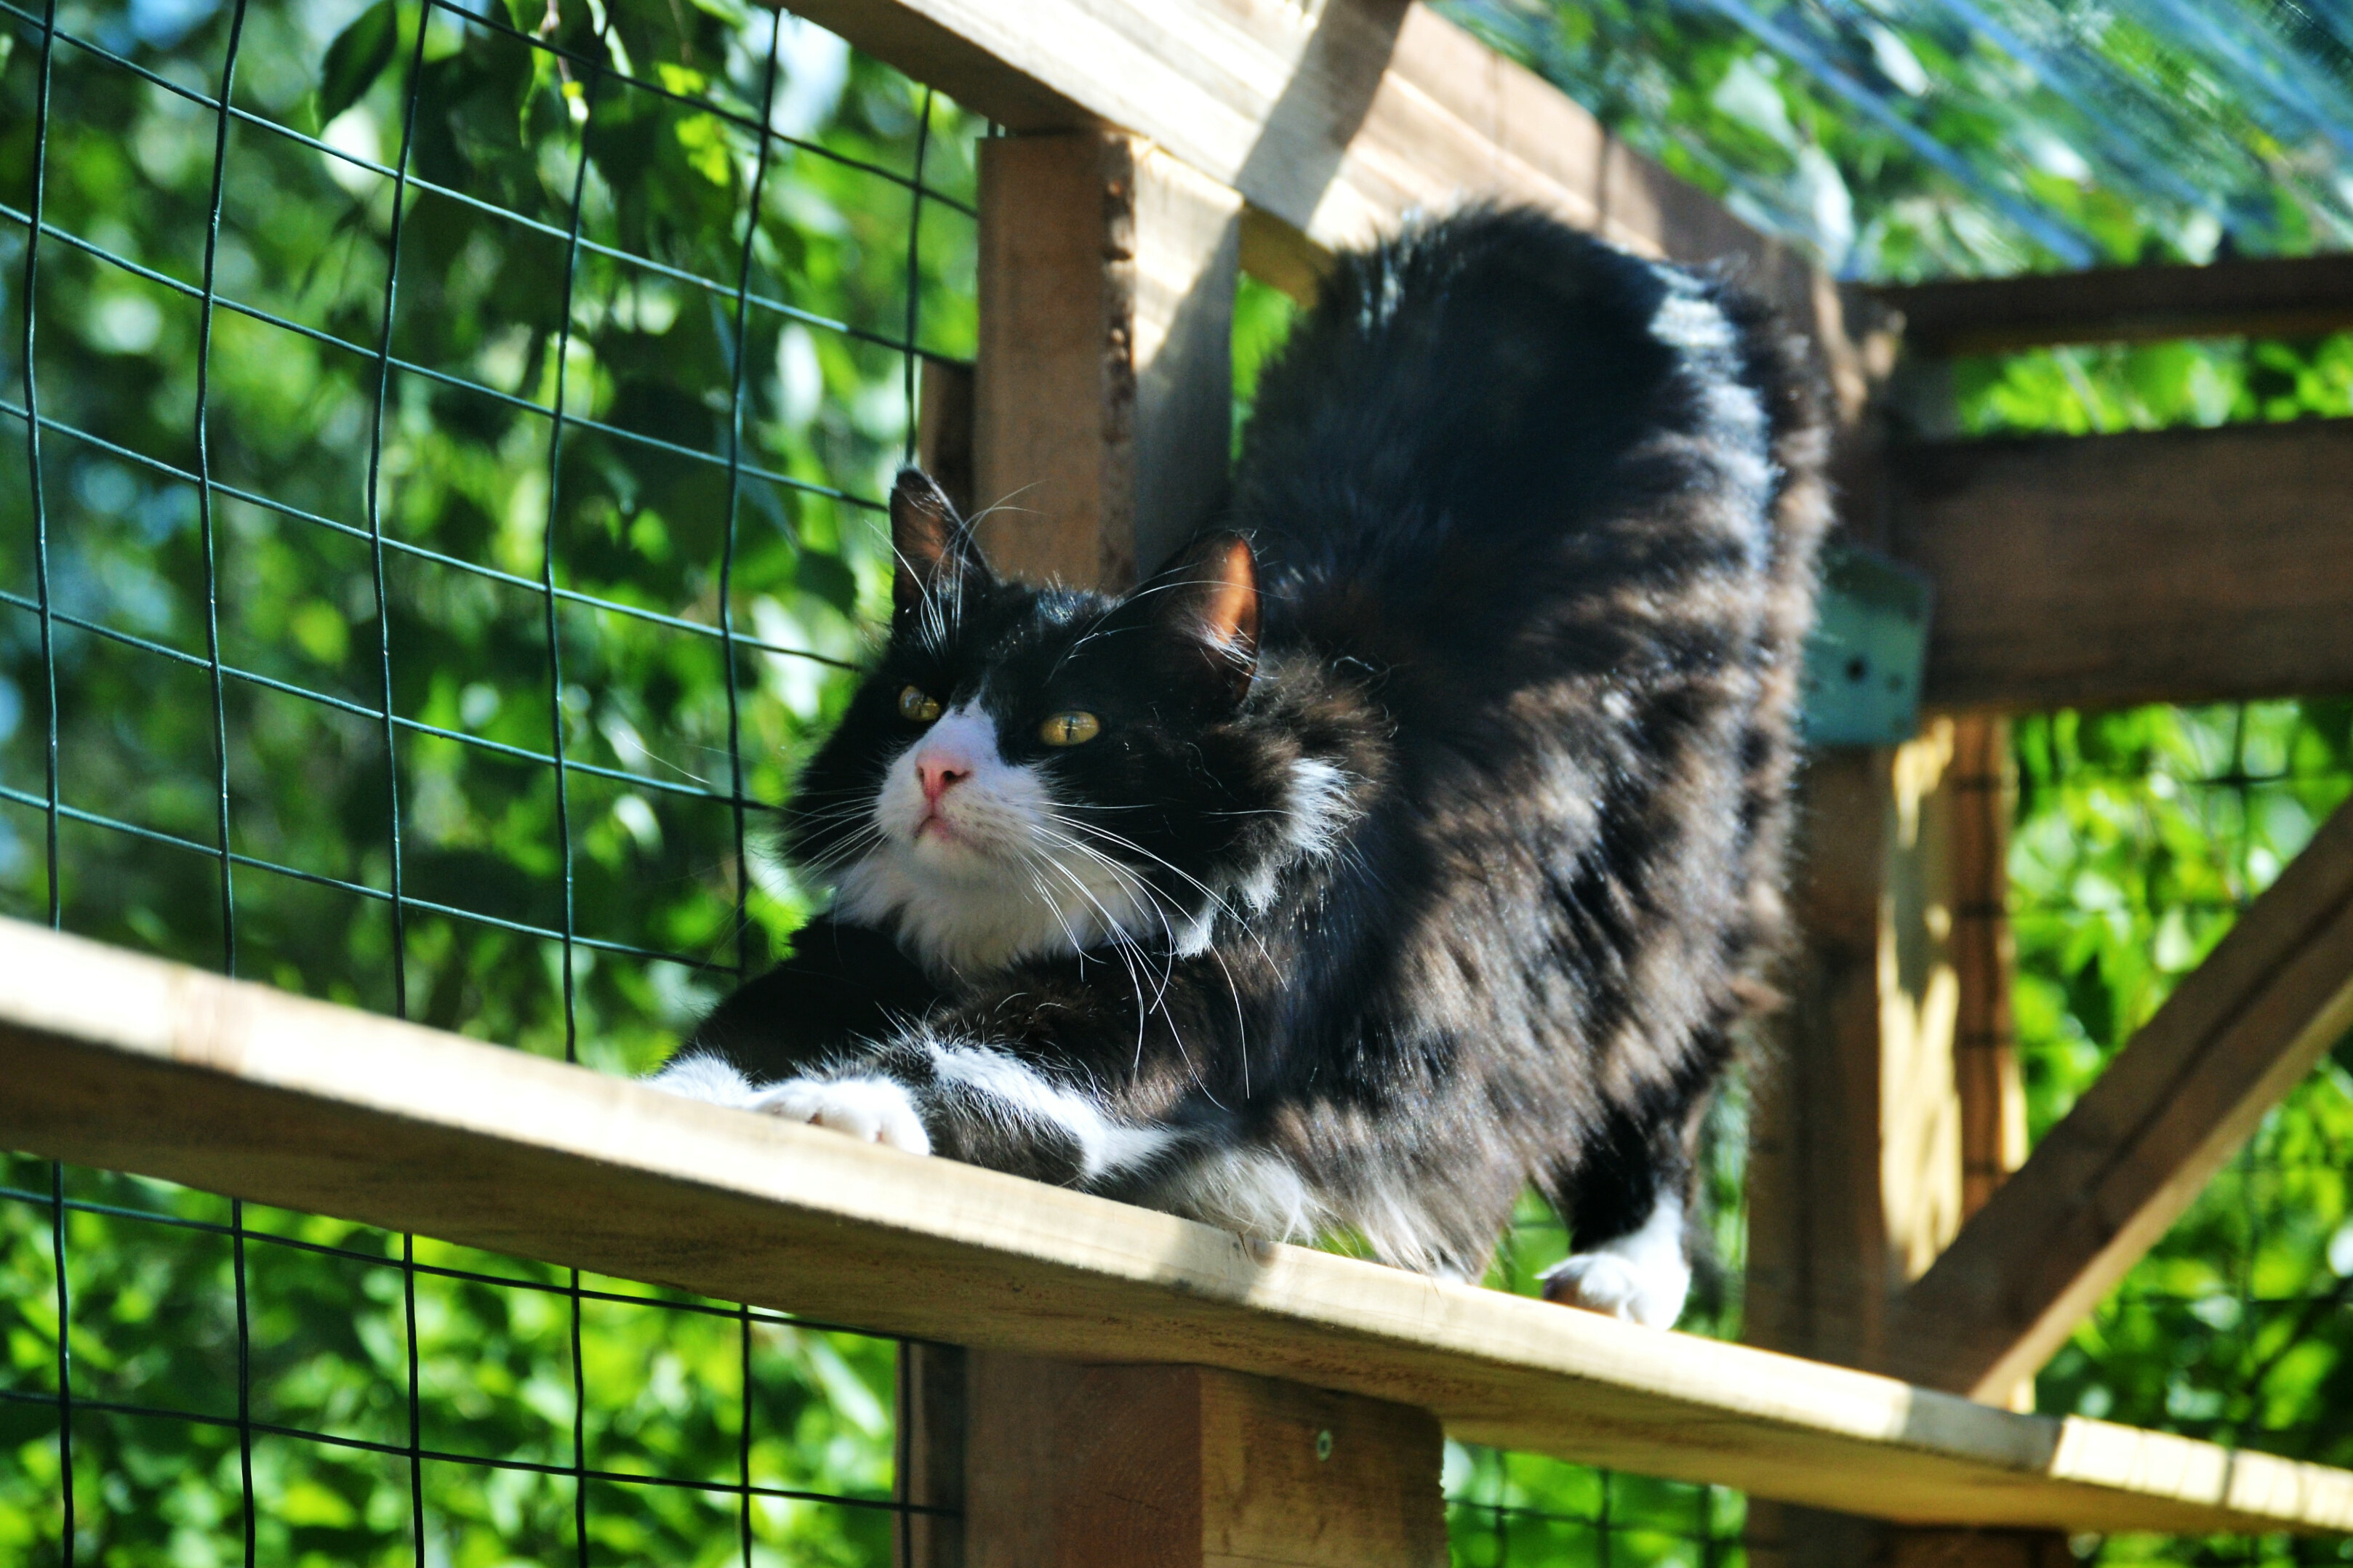 cat stretching inside an outdoor enclosure